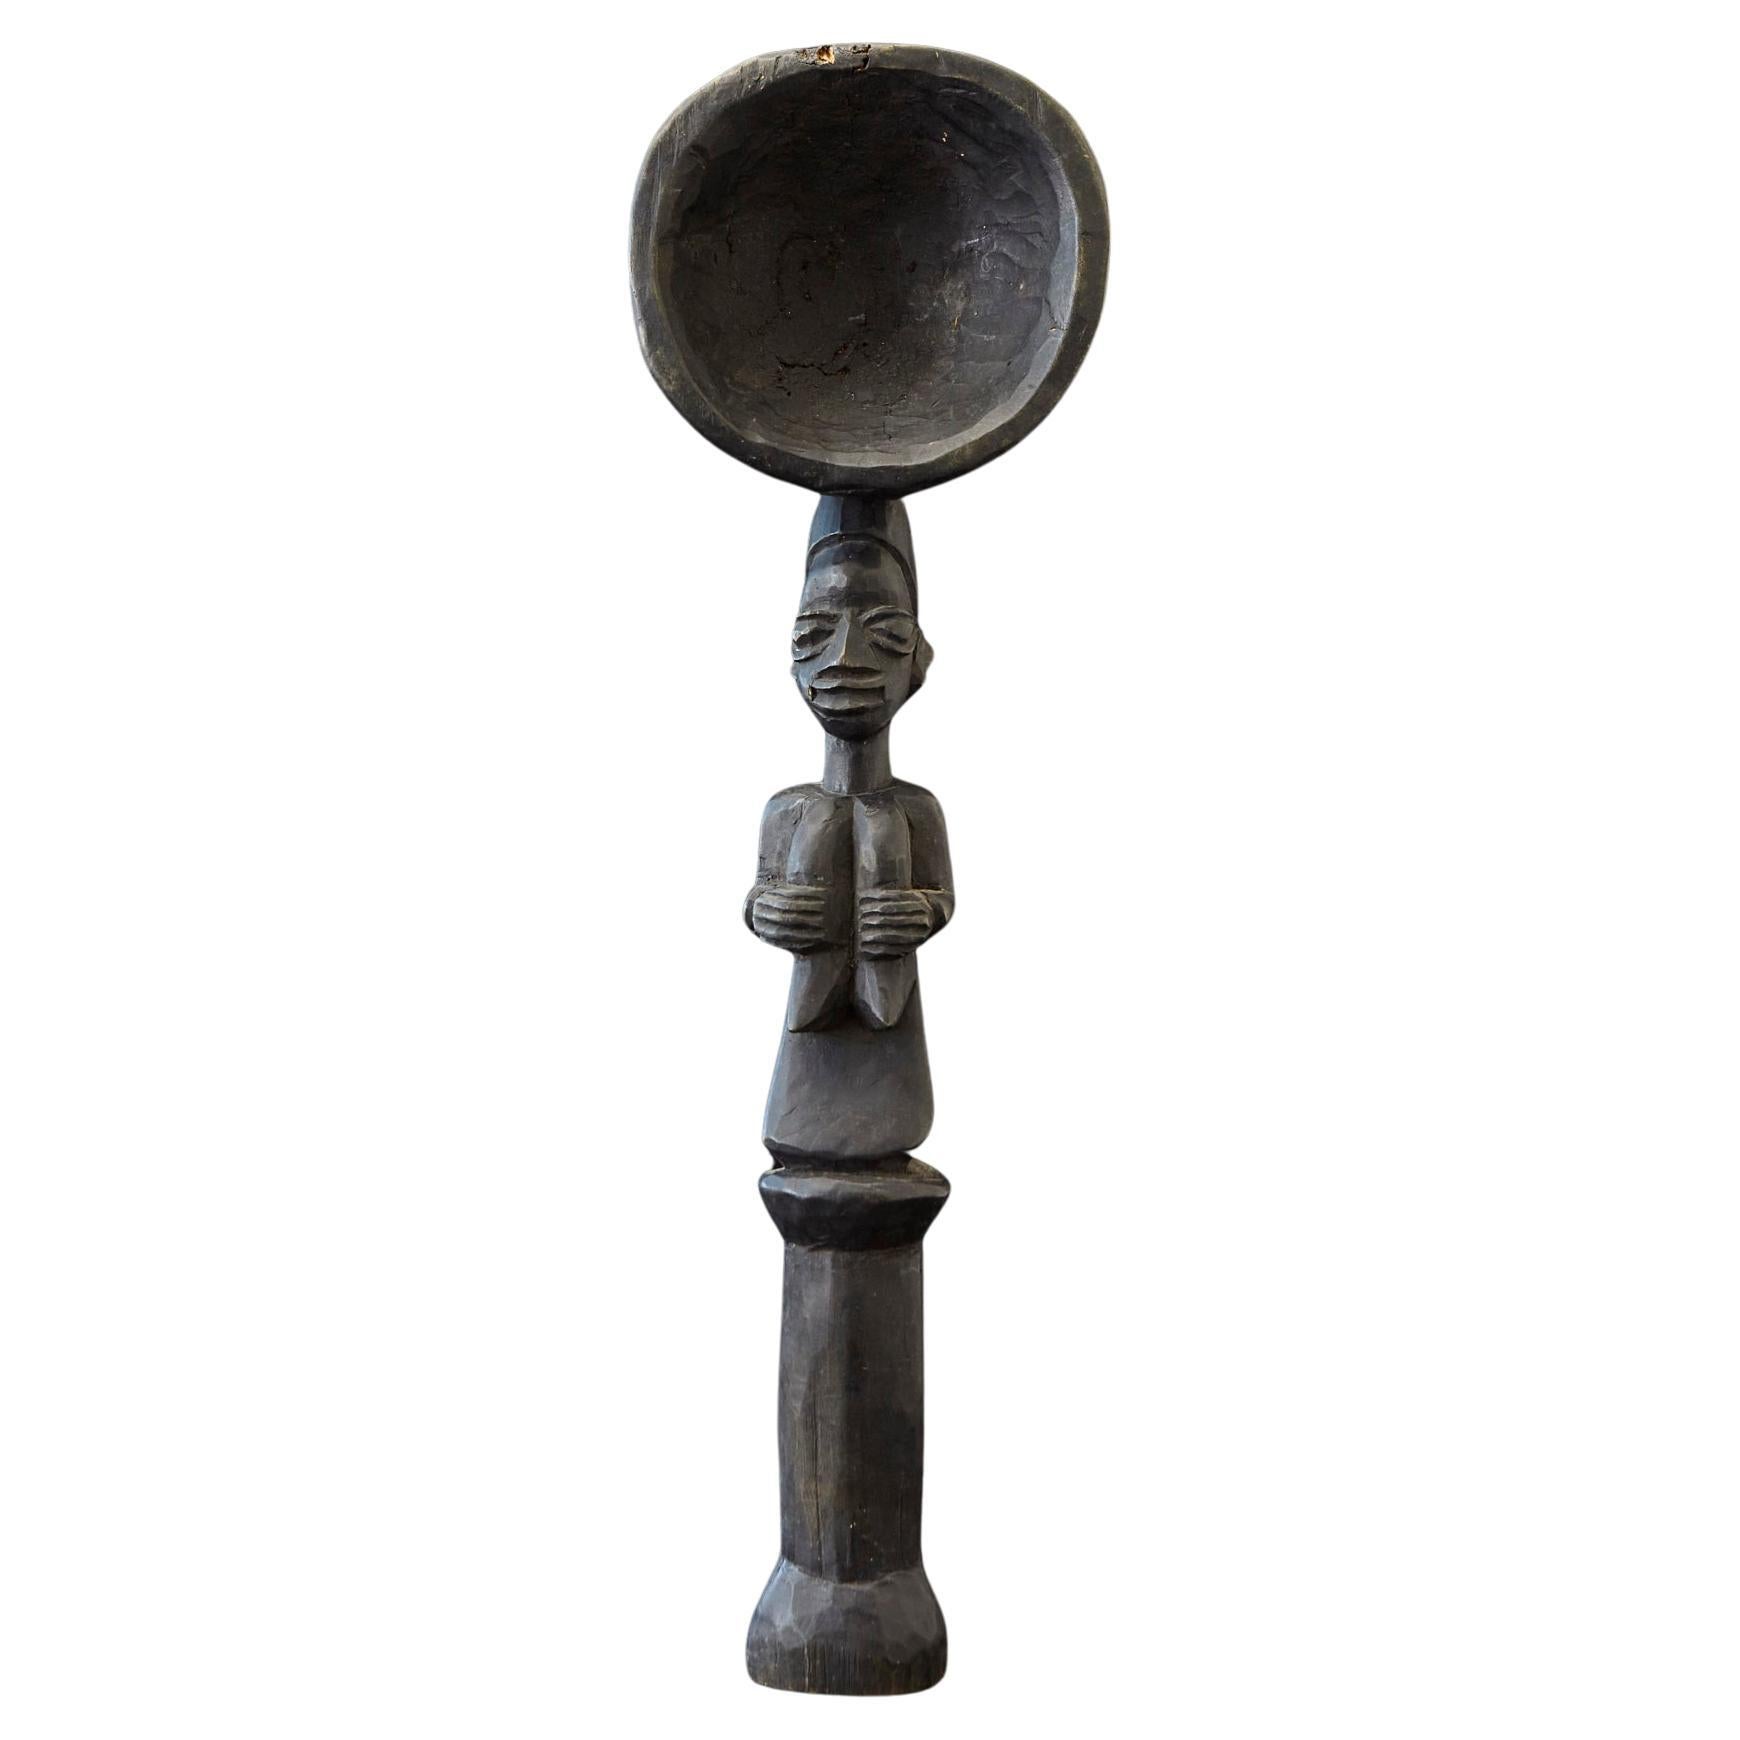 Standing Carved Wooden Figural Spoon, Yoruba People, 1960s